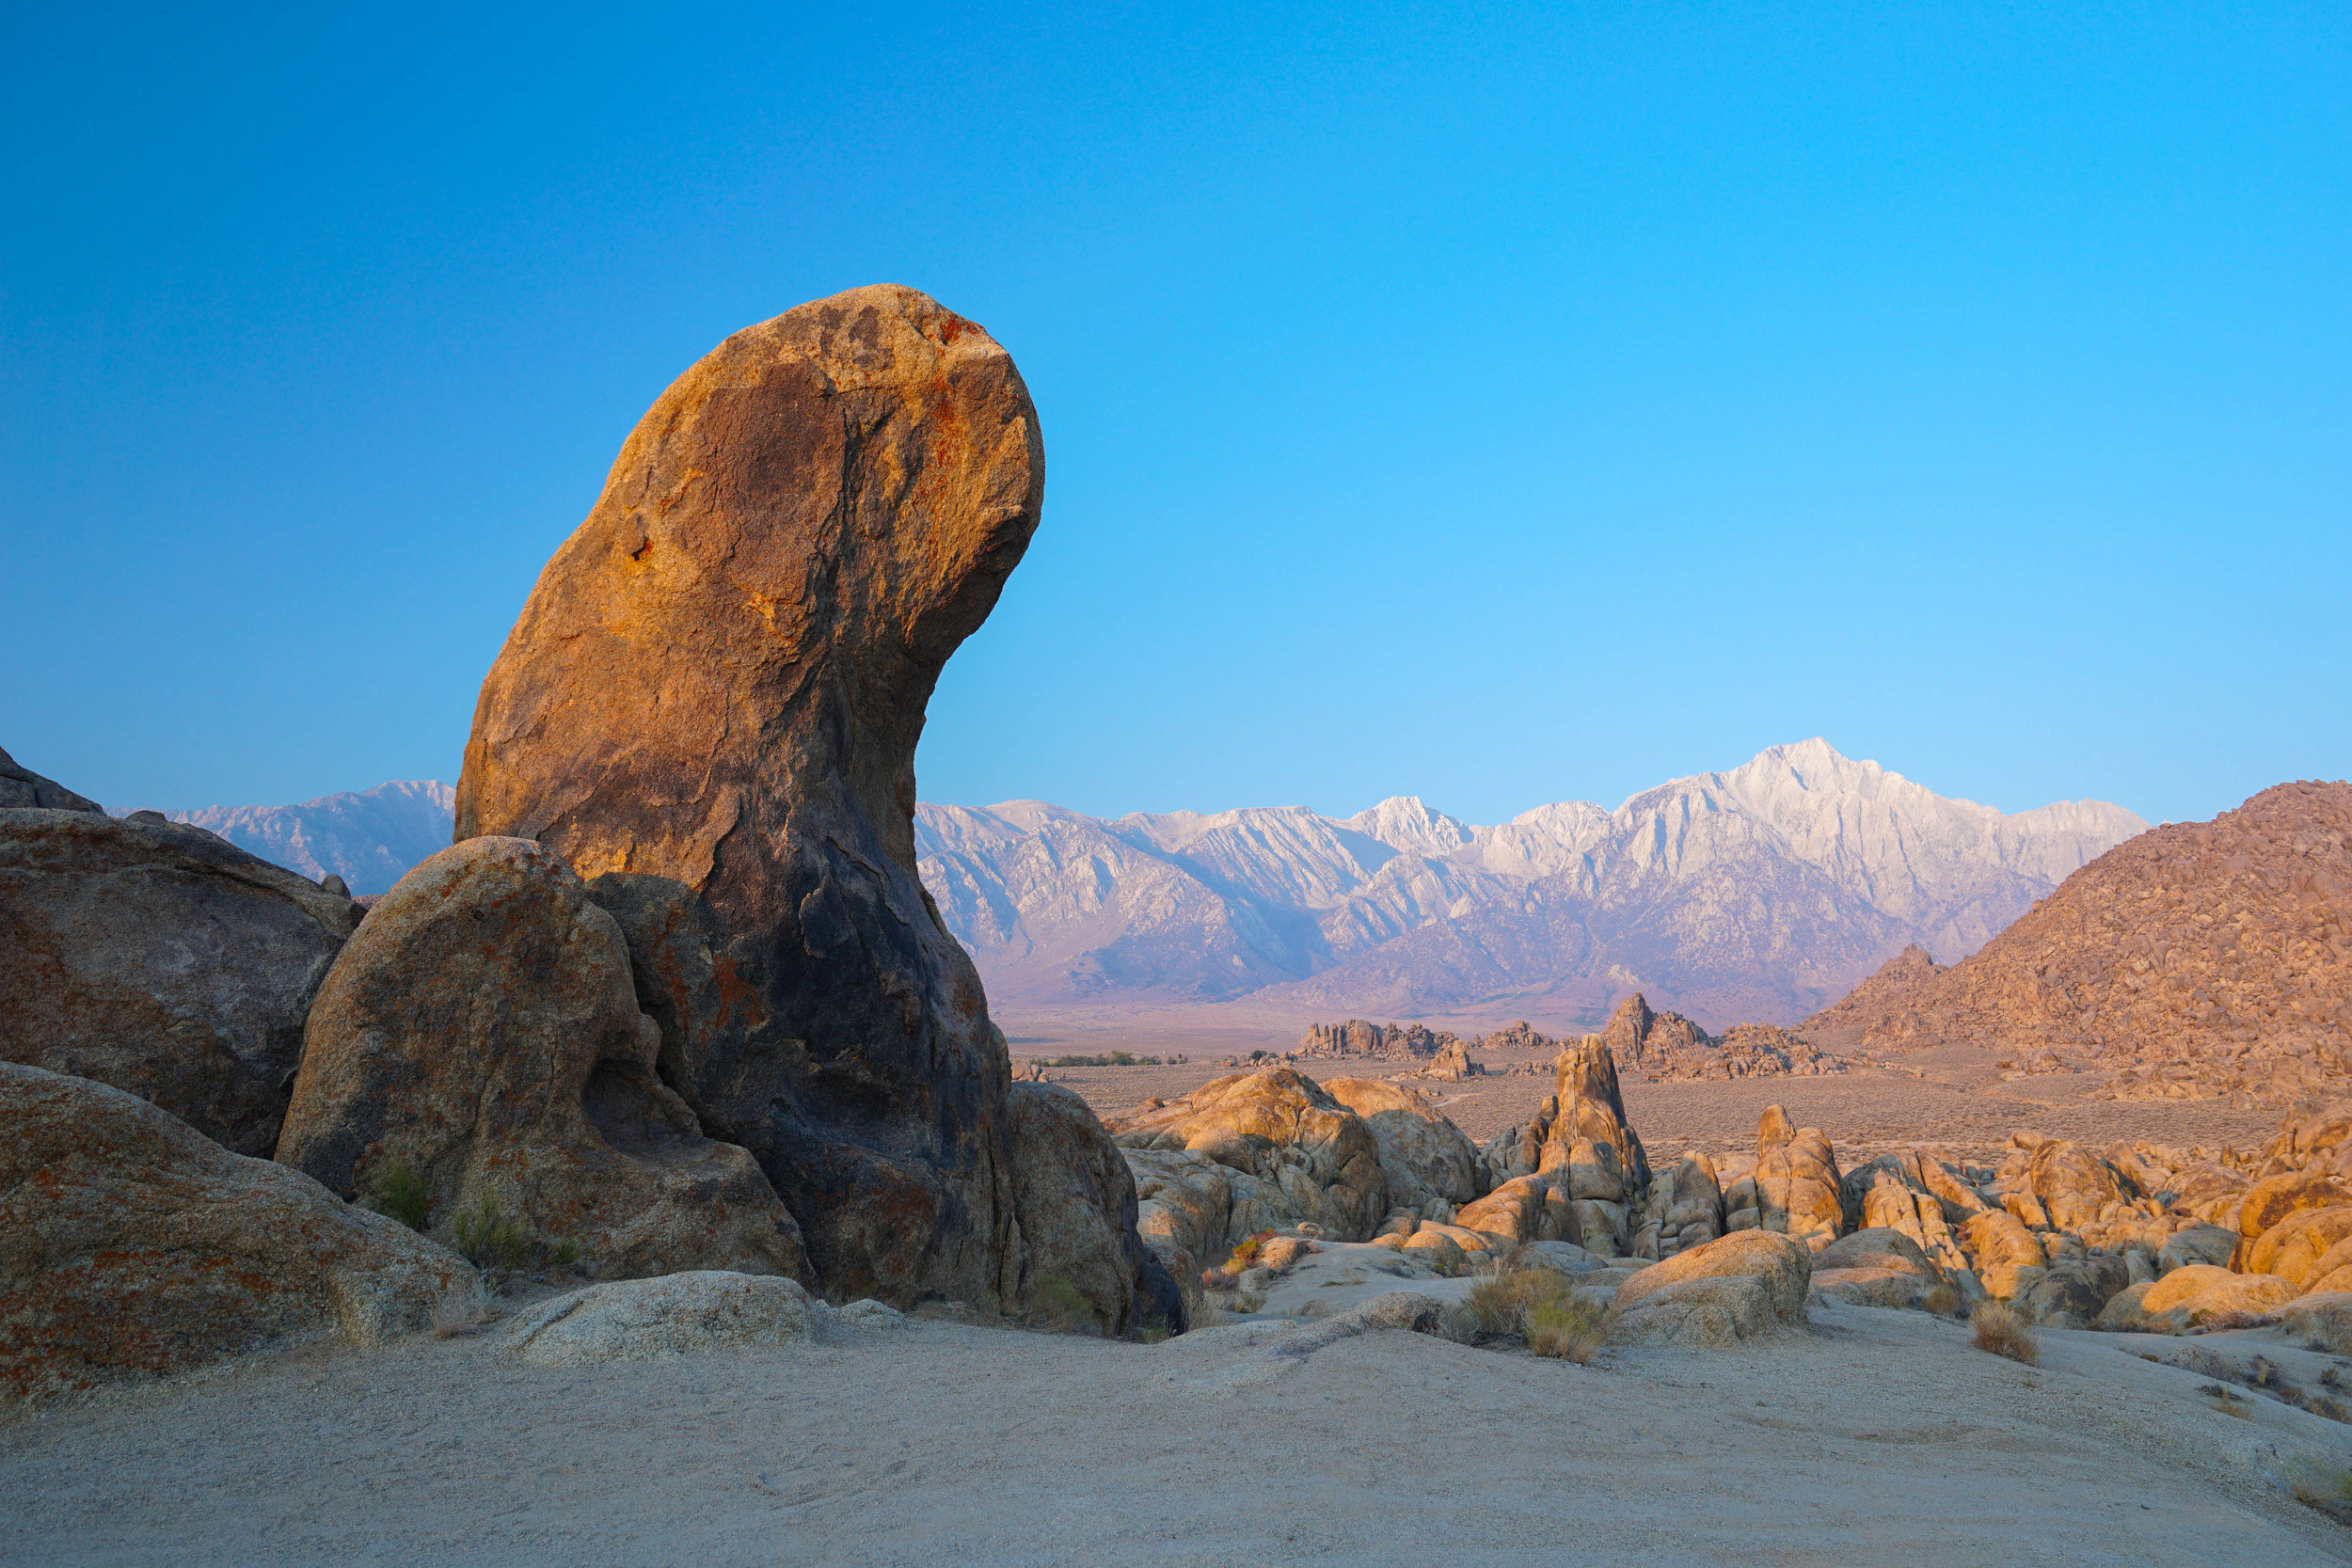 A stroll through the boulder field provides a view of Mt. Whitney at first light.